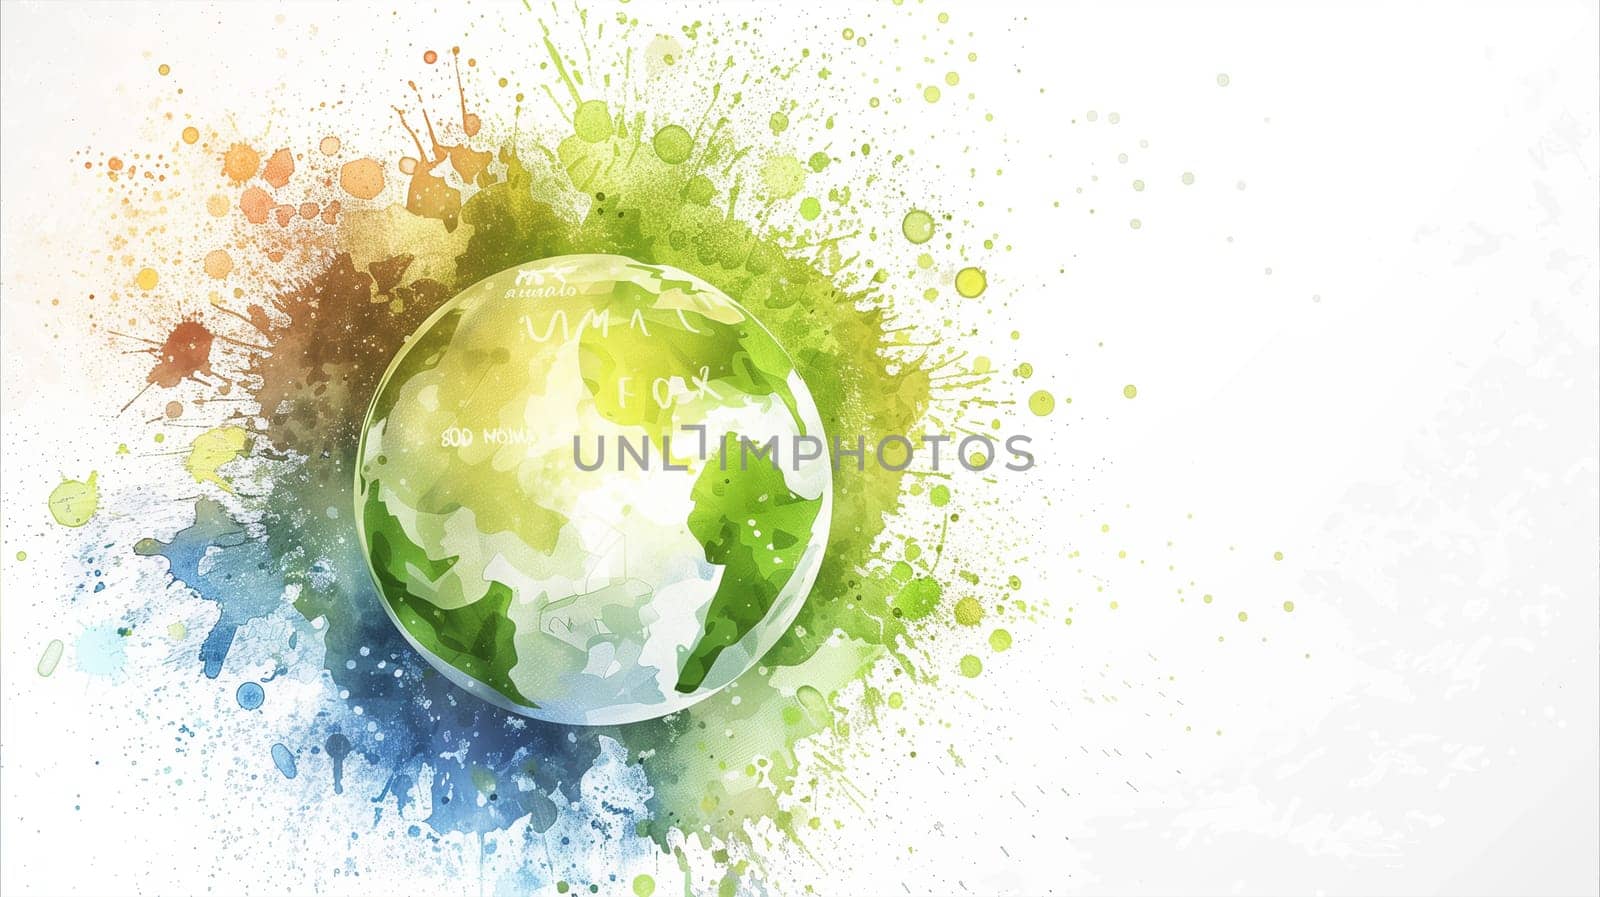 The Earth is depicted in vibrant colors with paint splatters, set against a white background.